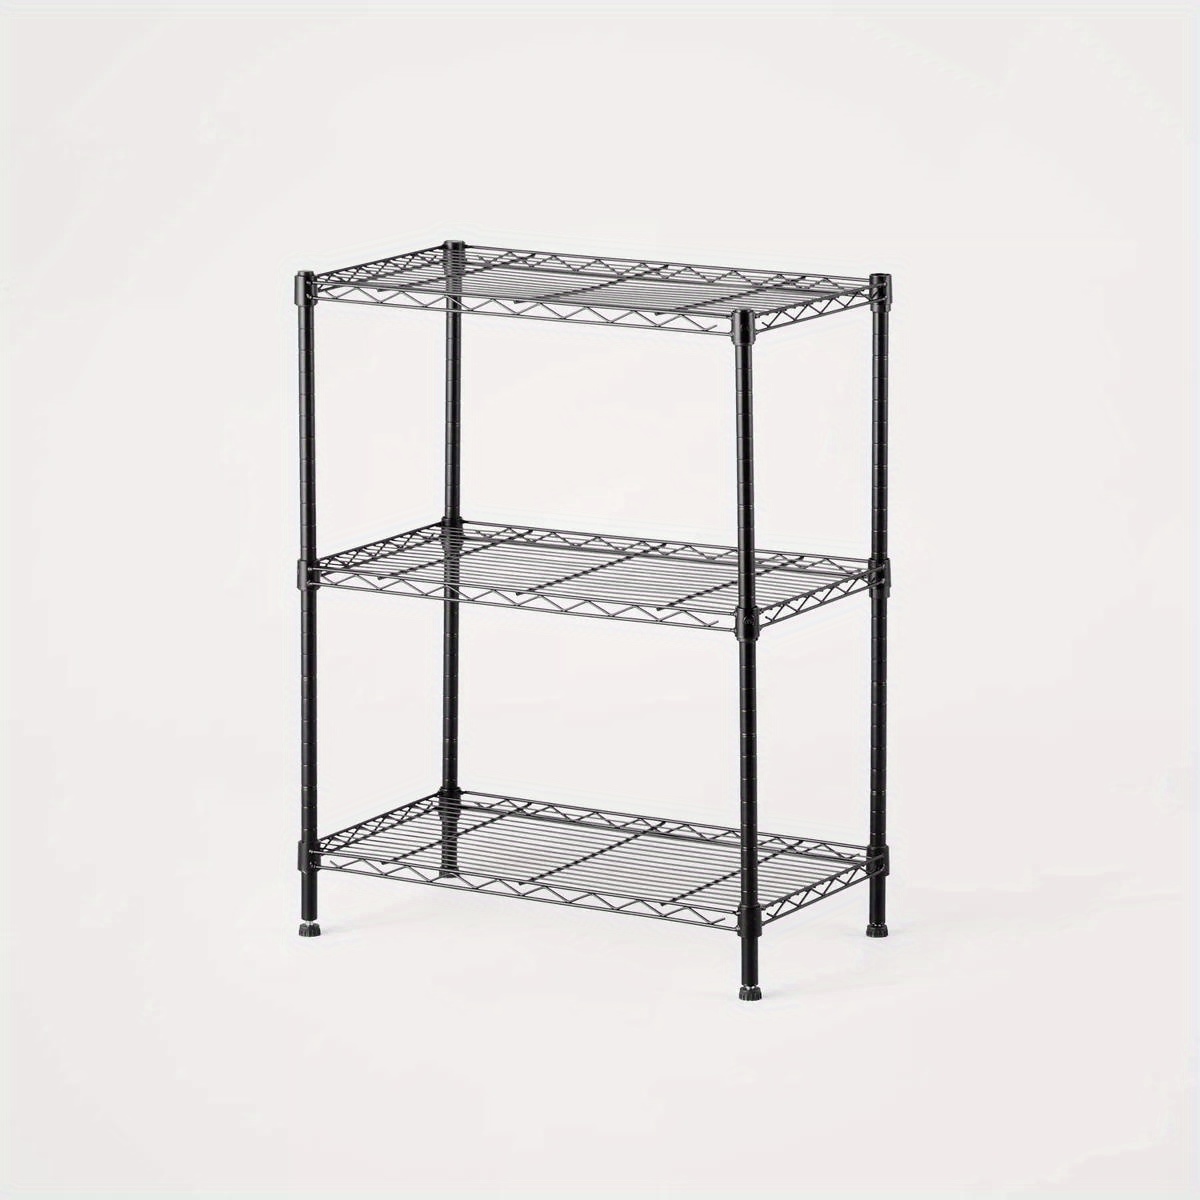 

3-tier Stainless Steel Wire Shelving Unit, Adjustable Metal Storage Rack, Durable Organizer For Home, Kitchen, Office – Black